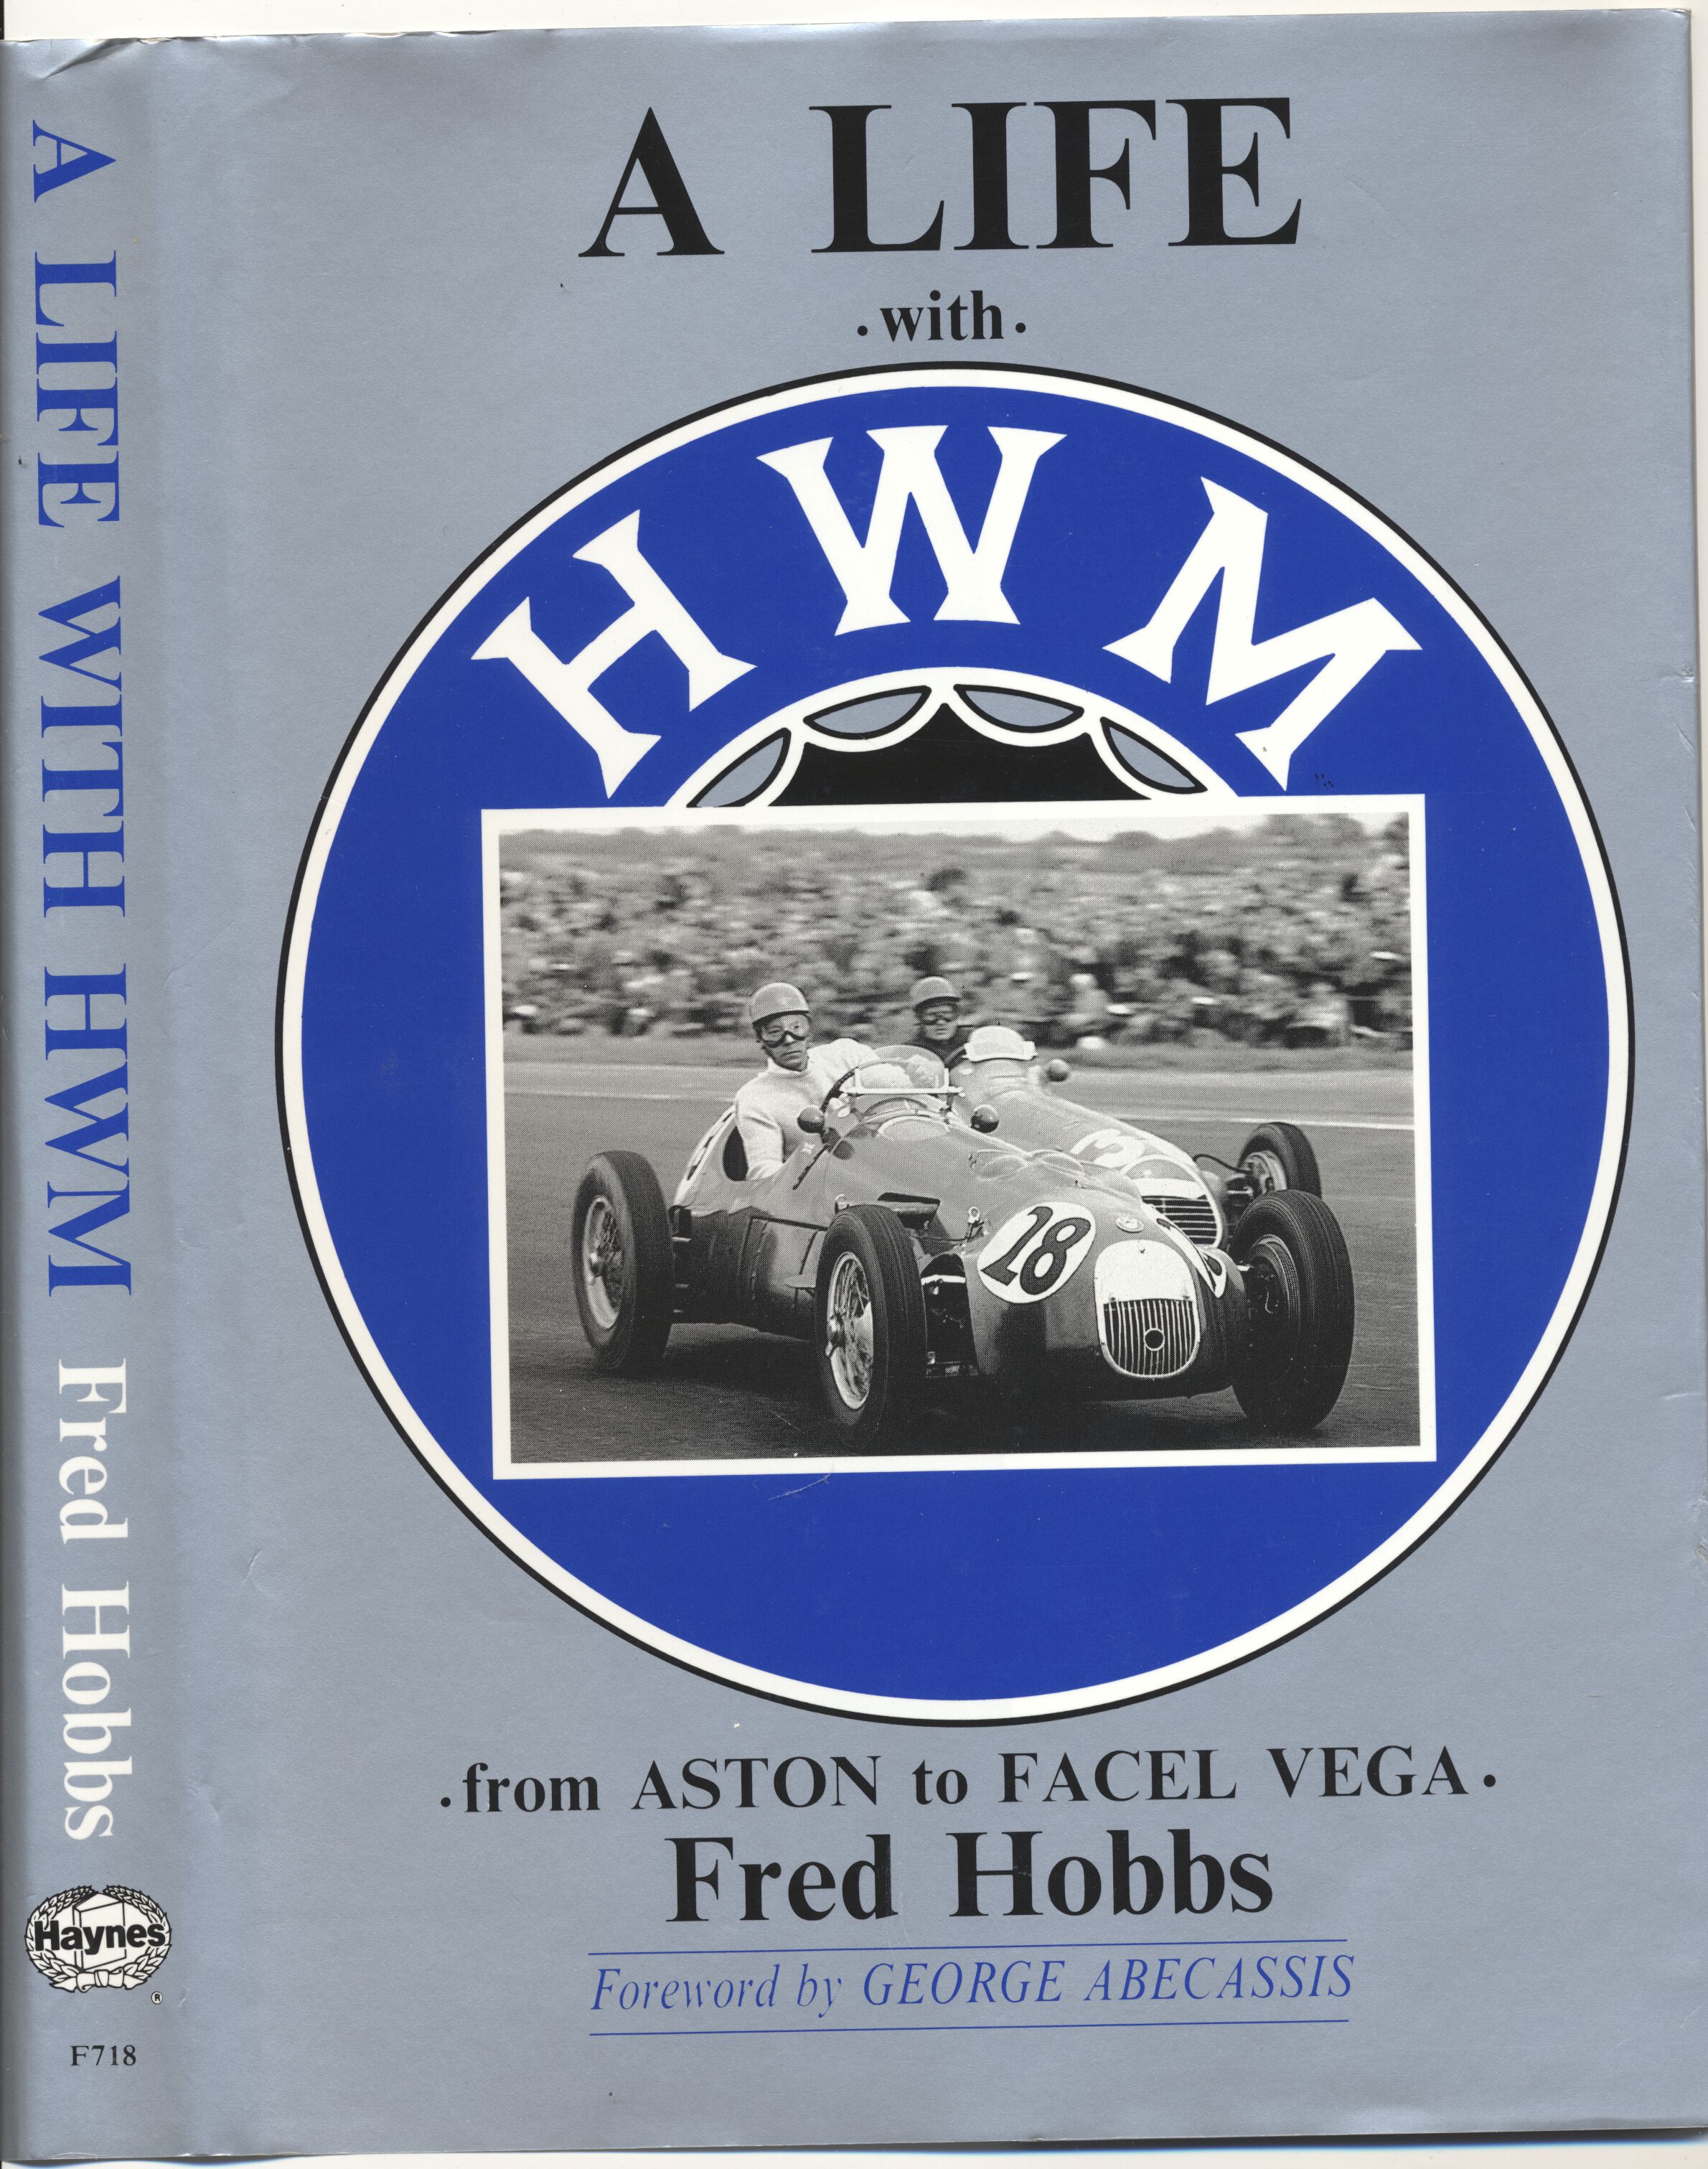 A Life with HWM from Aston to Facel Vega - Fred Hobbs